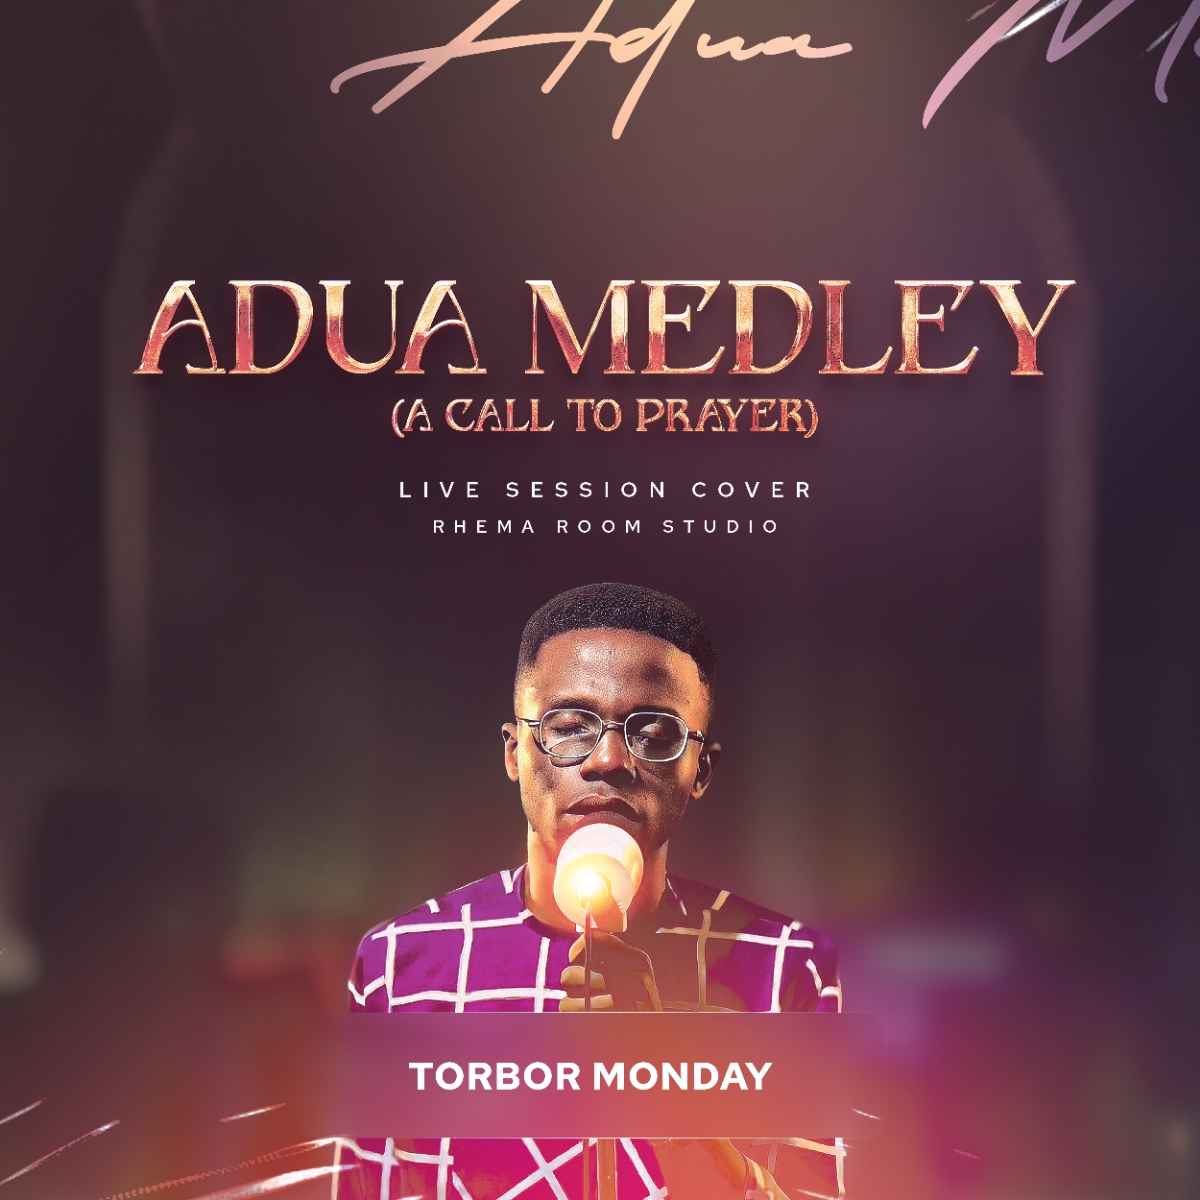 Adua Medley by Torbor Monday